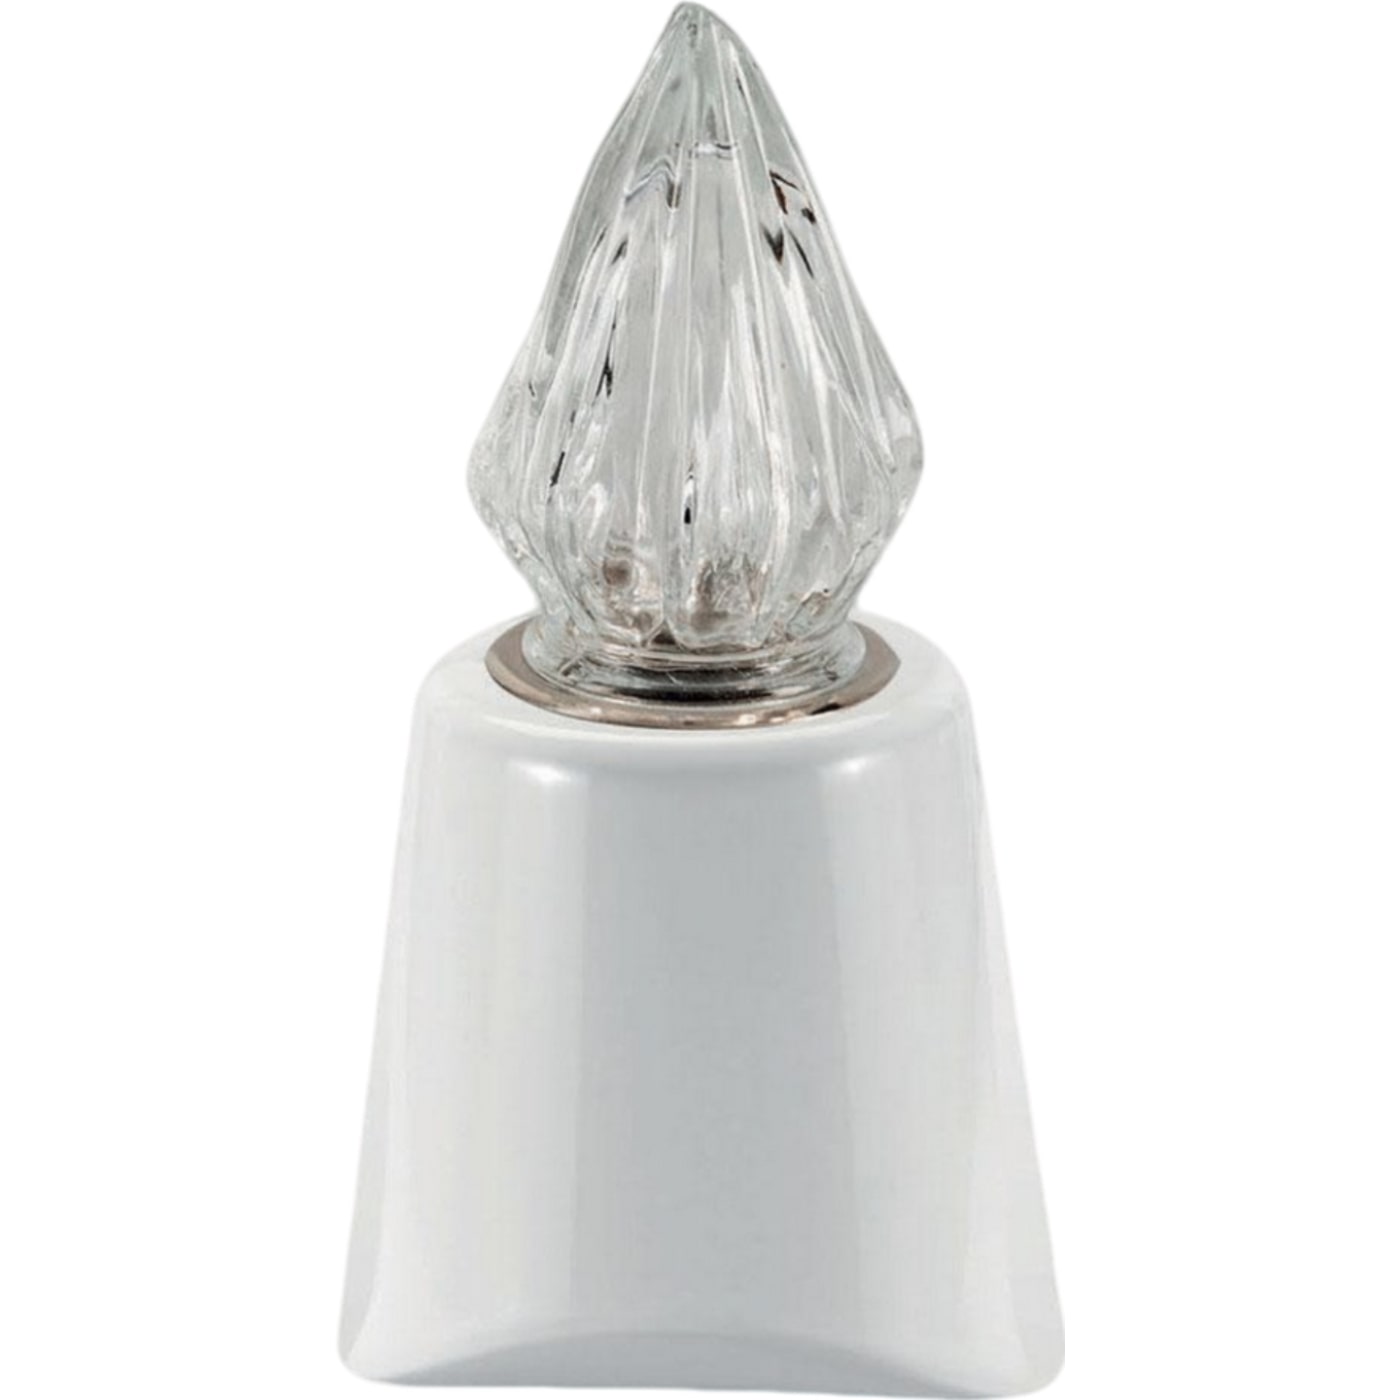 Grave light Giselle 10x10cm - 3.9x3.9in In white porcelain, wall attached GI130P